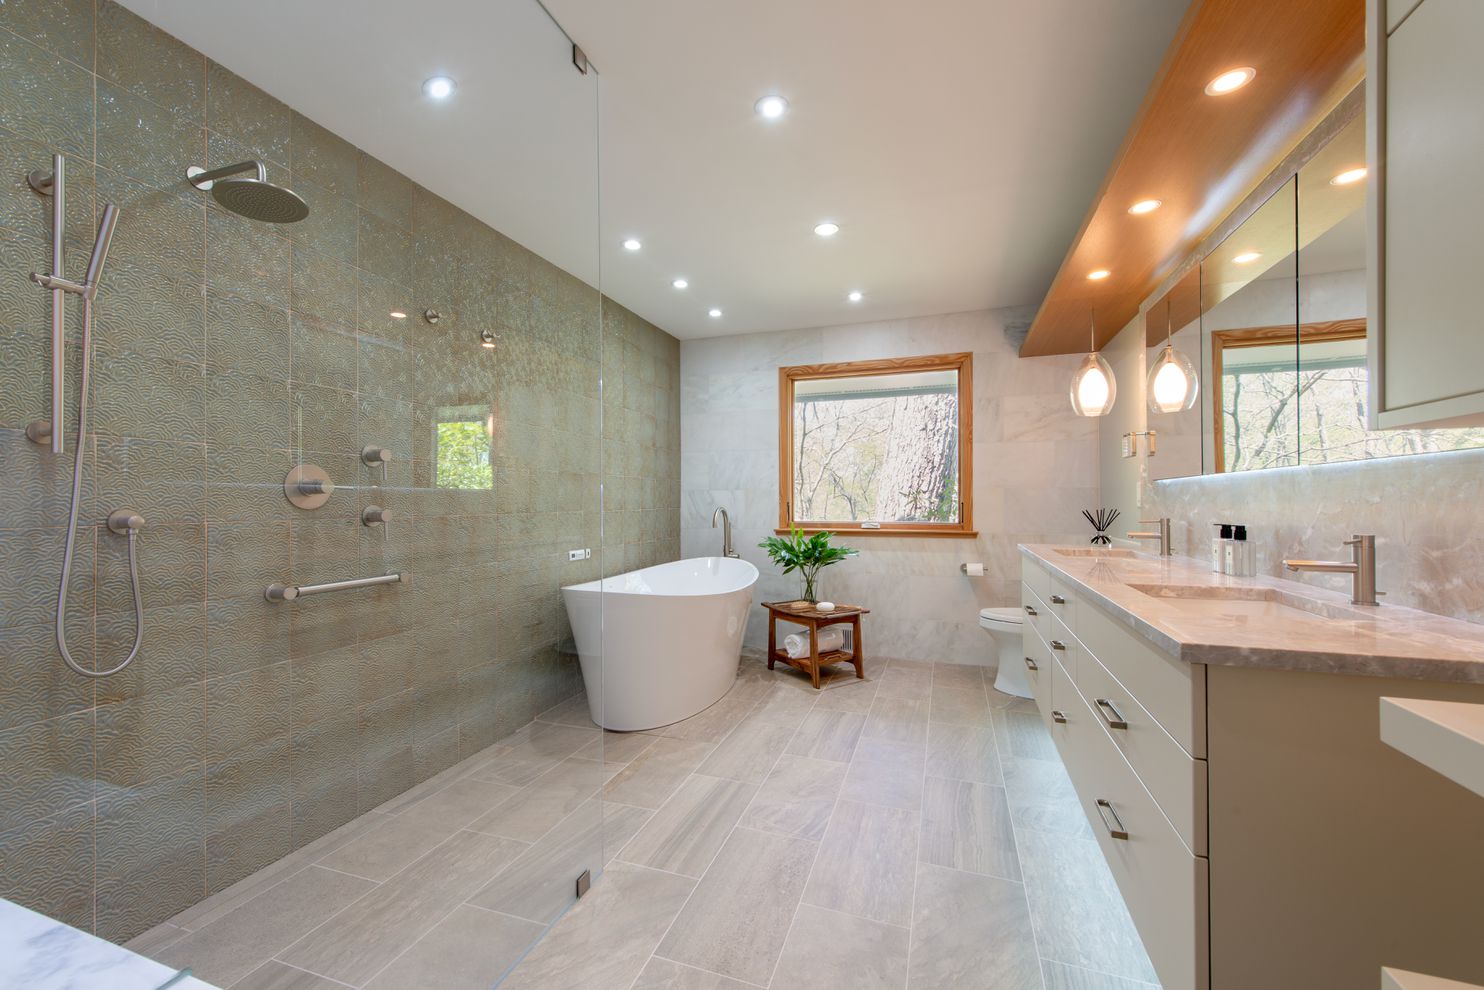 Best Bathroom Designs - Photos All Recommendation